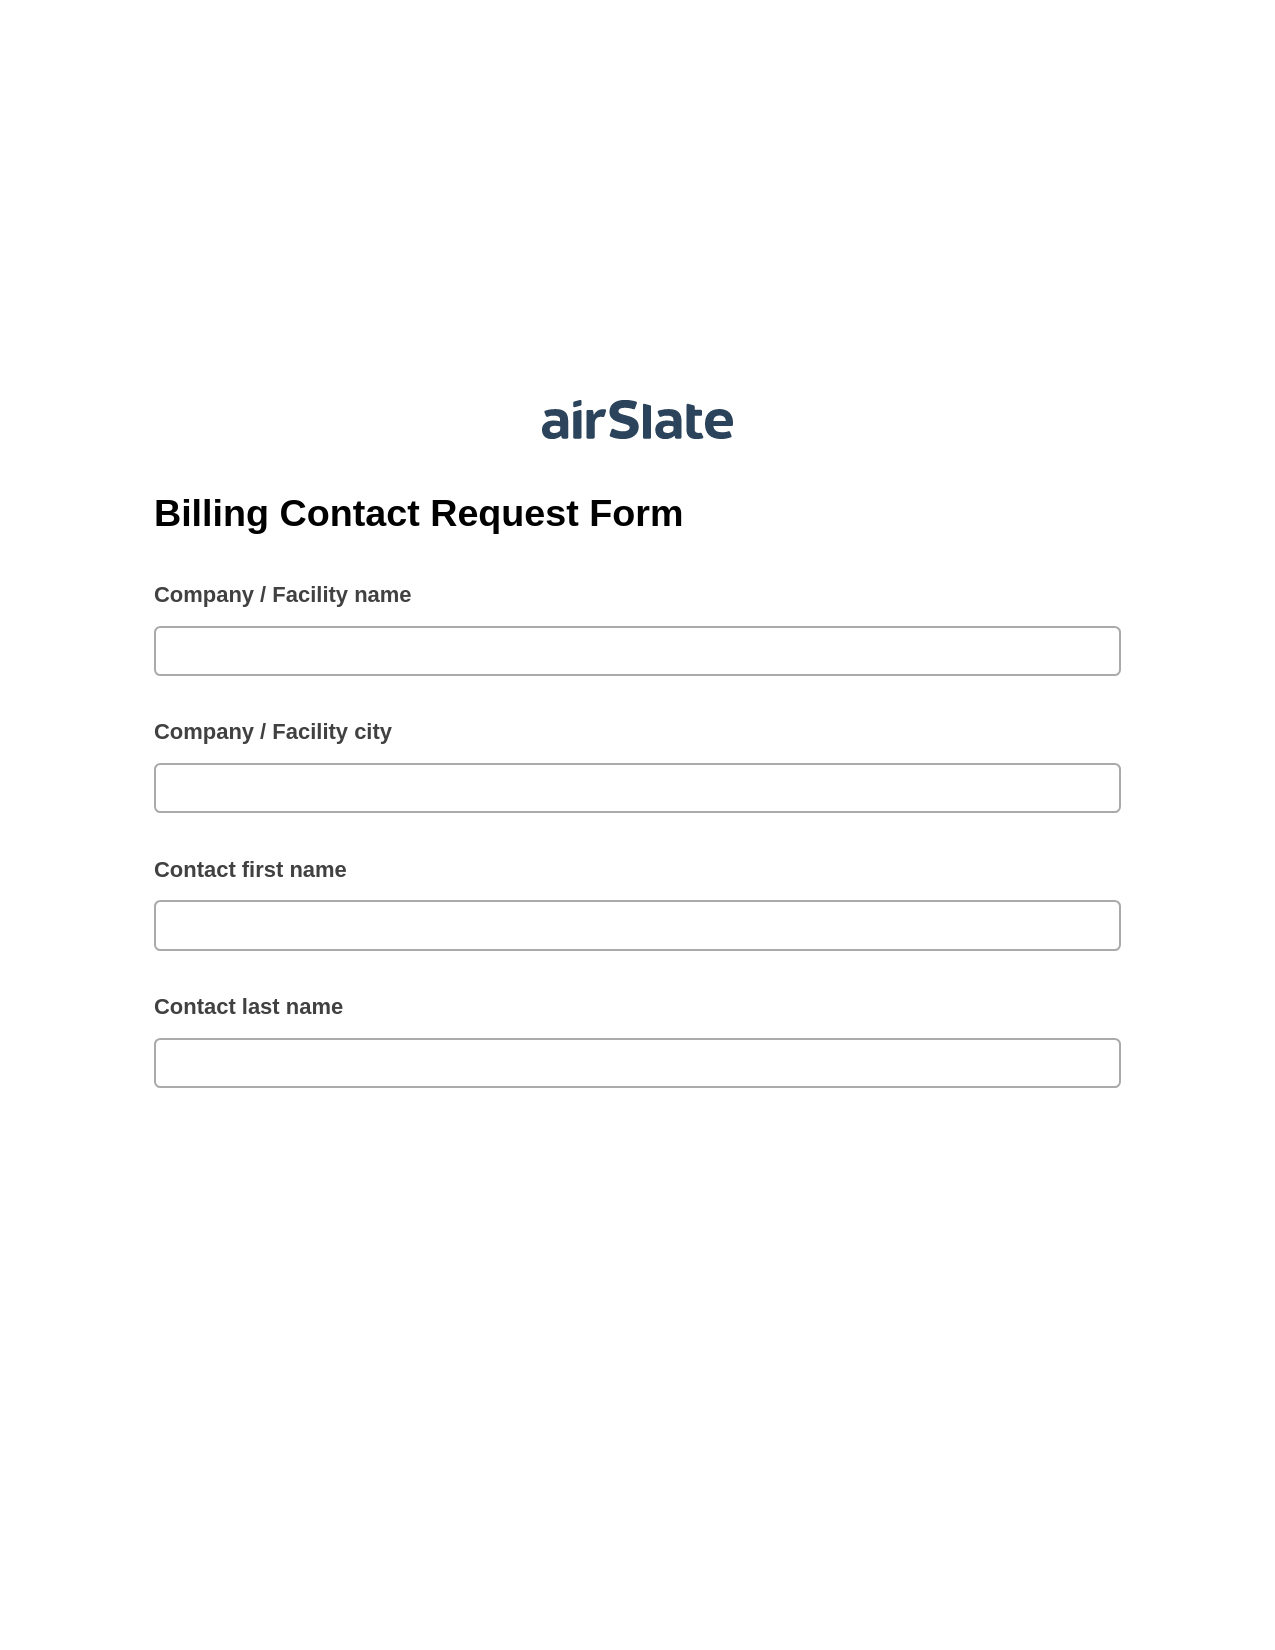 Billing Contact Request Form Pre-fill Document Bot, Roles Reminder Bot, Post-finish Document Bot